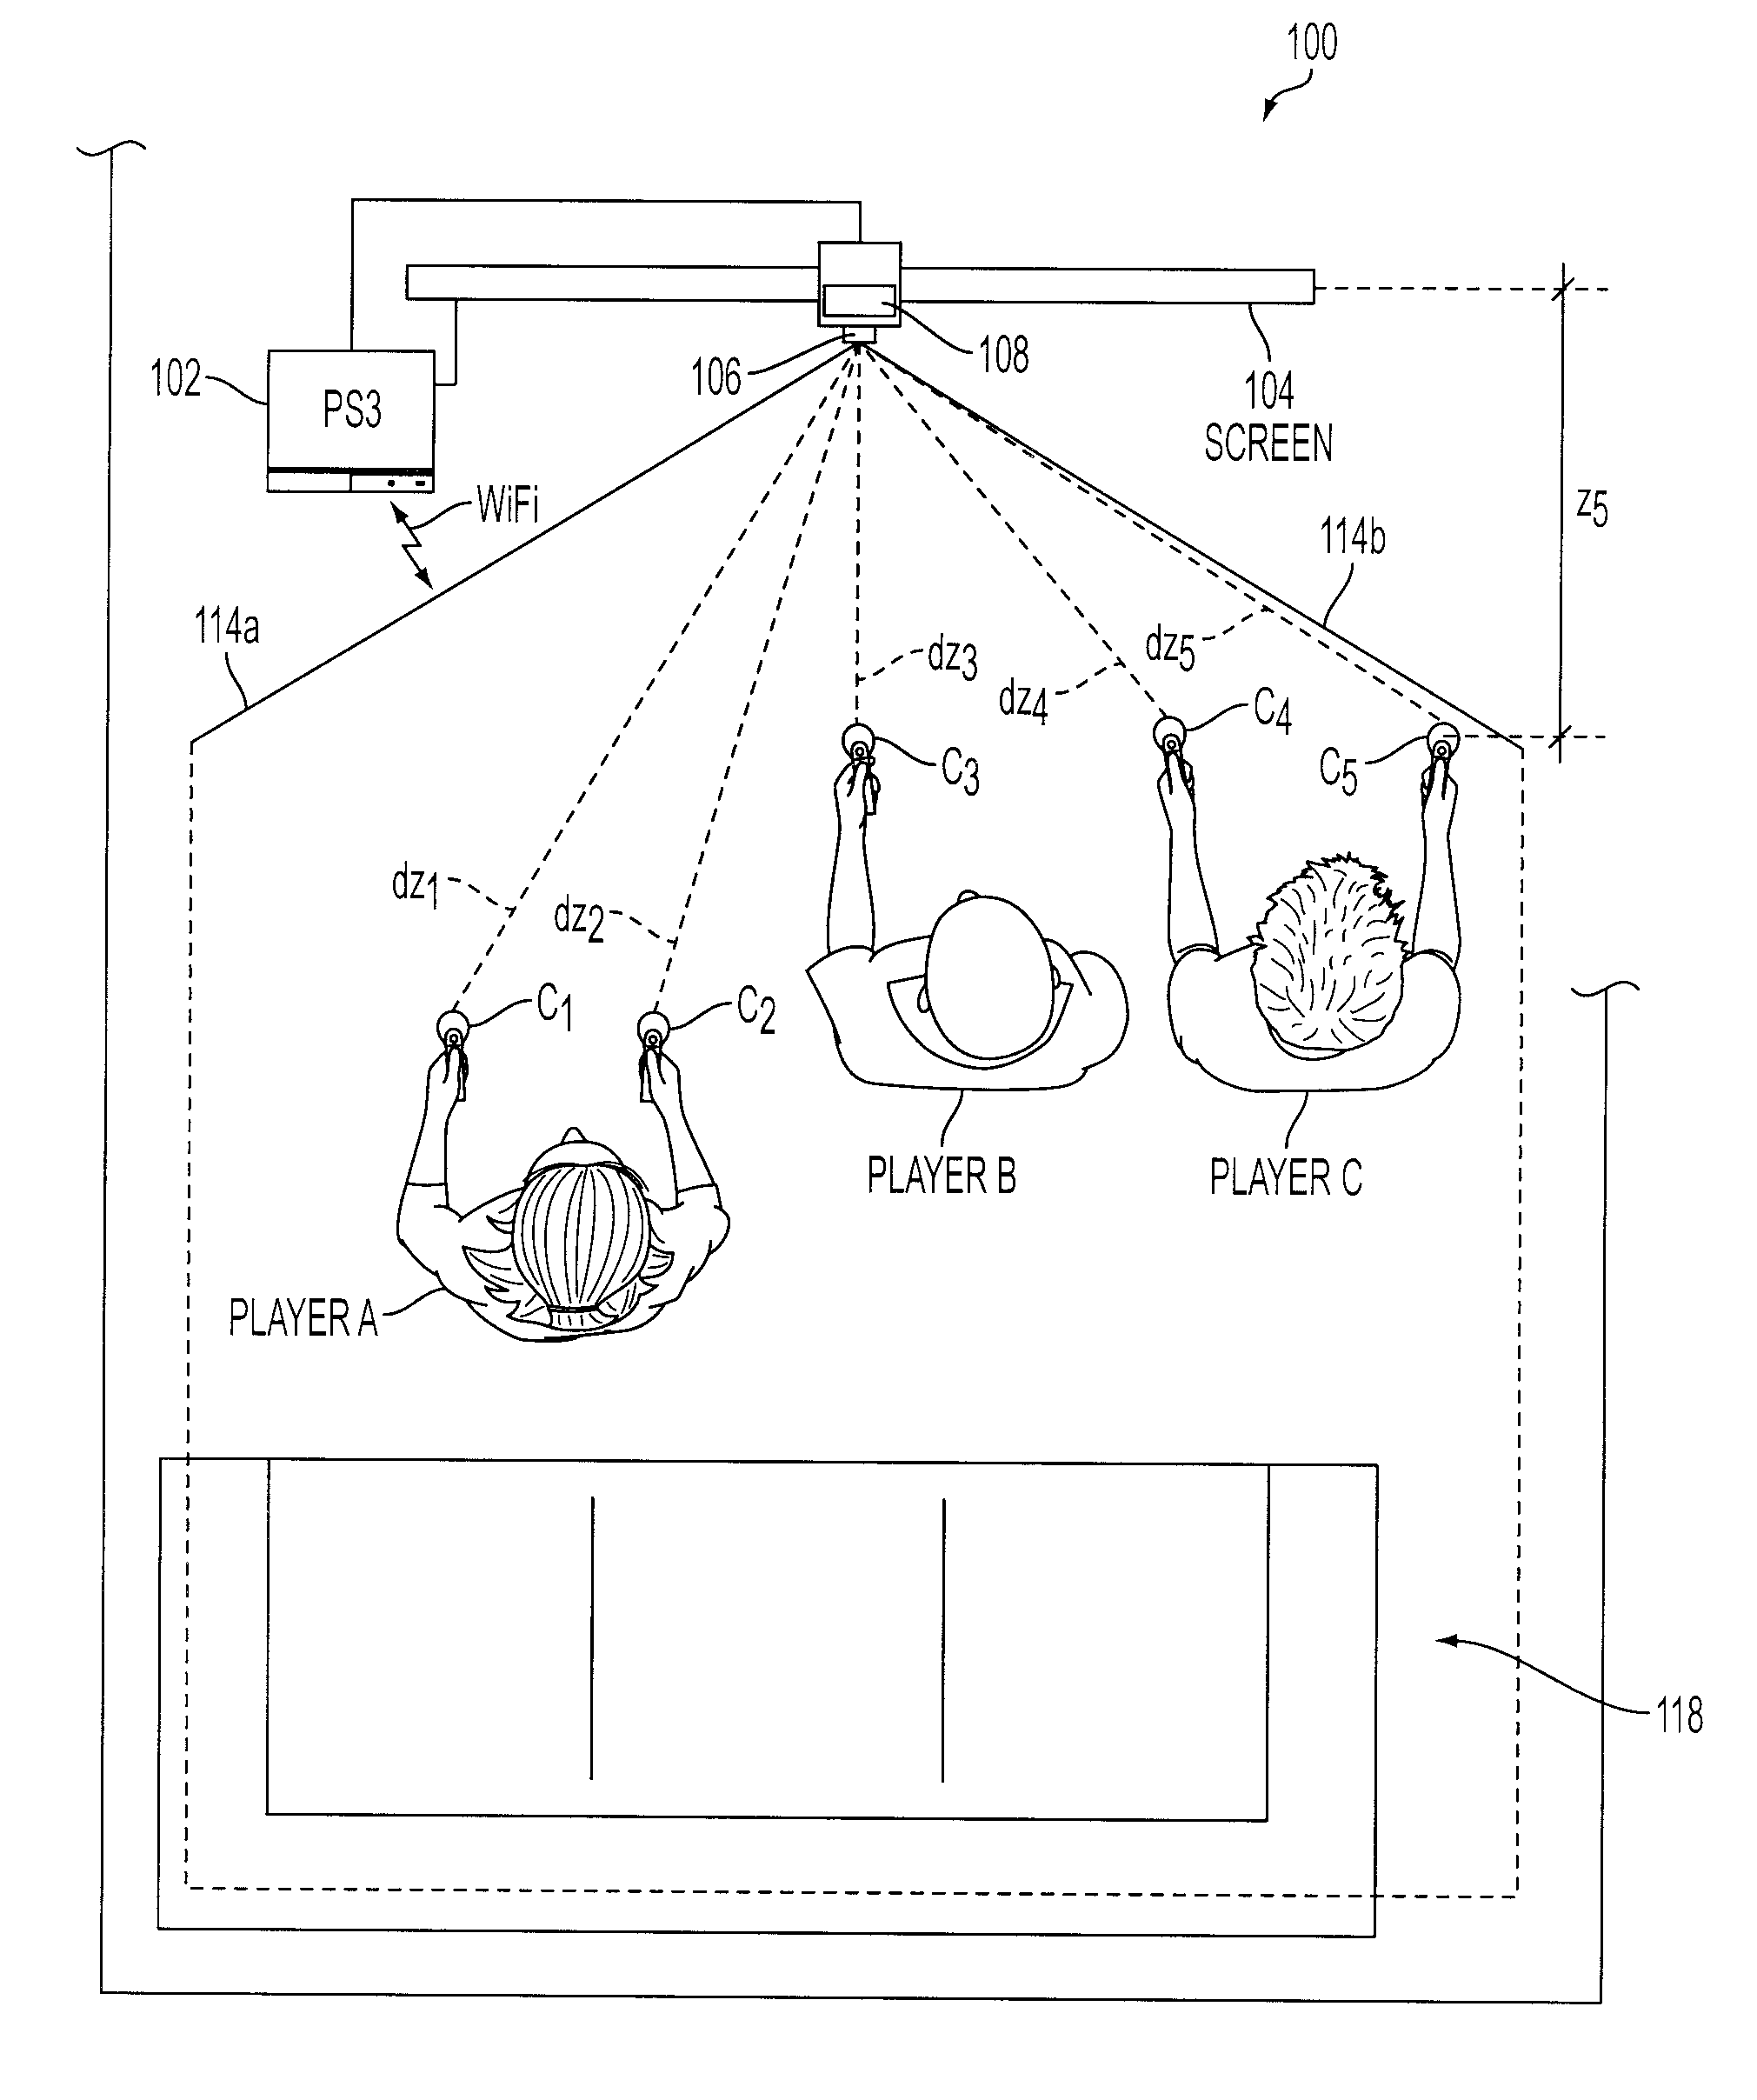 Determination of controller three-dimensional location using image analysis and ultrasonic communication